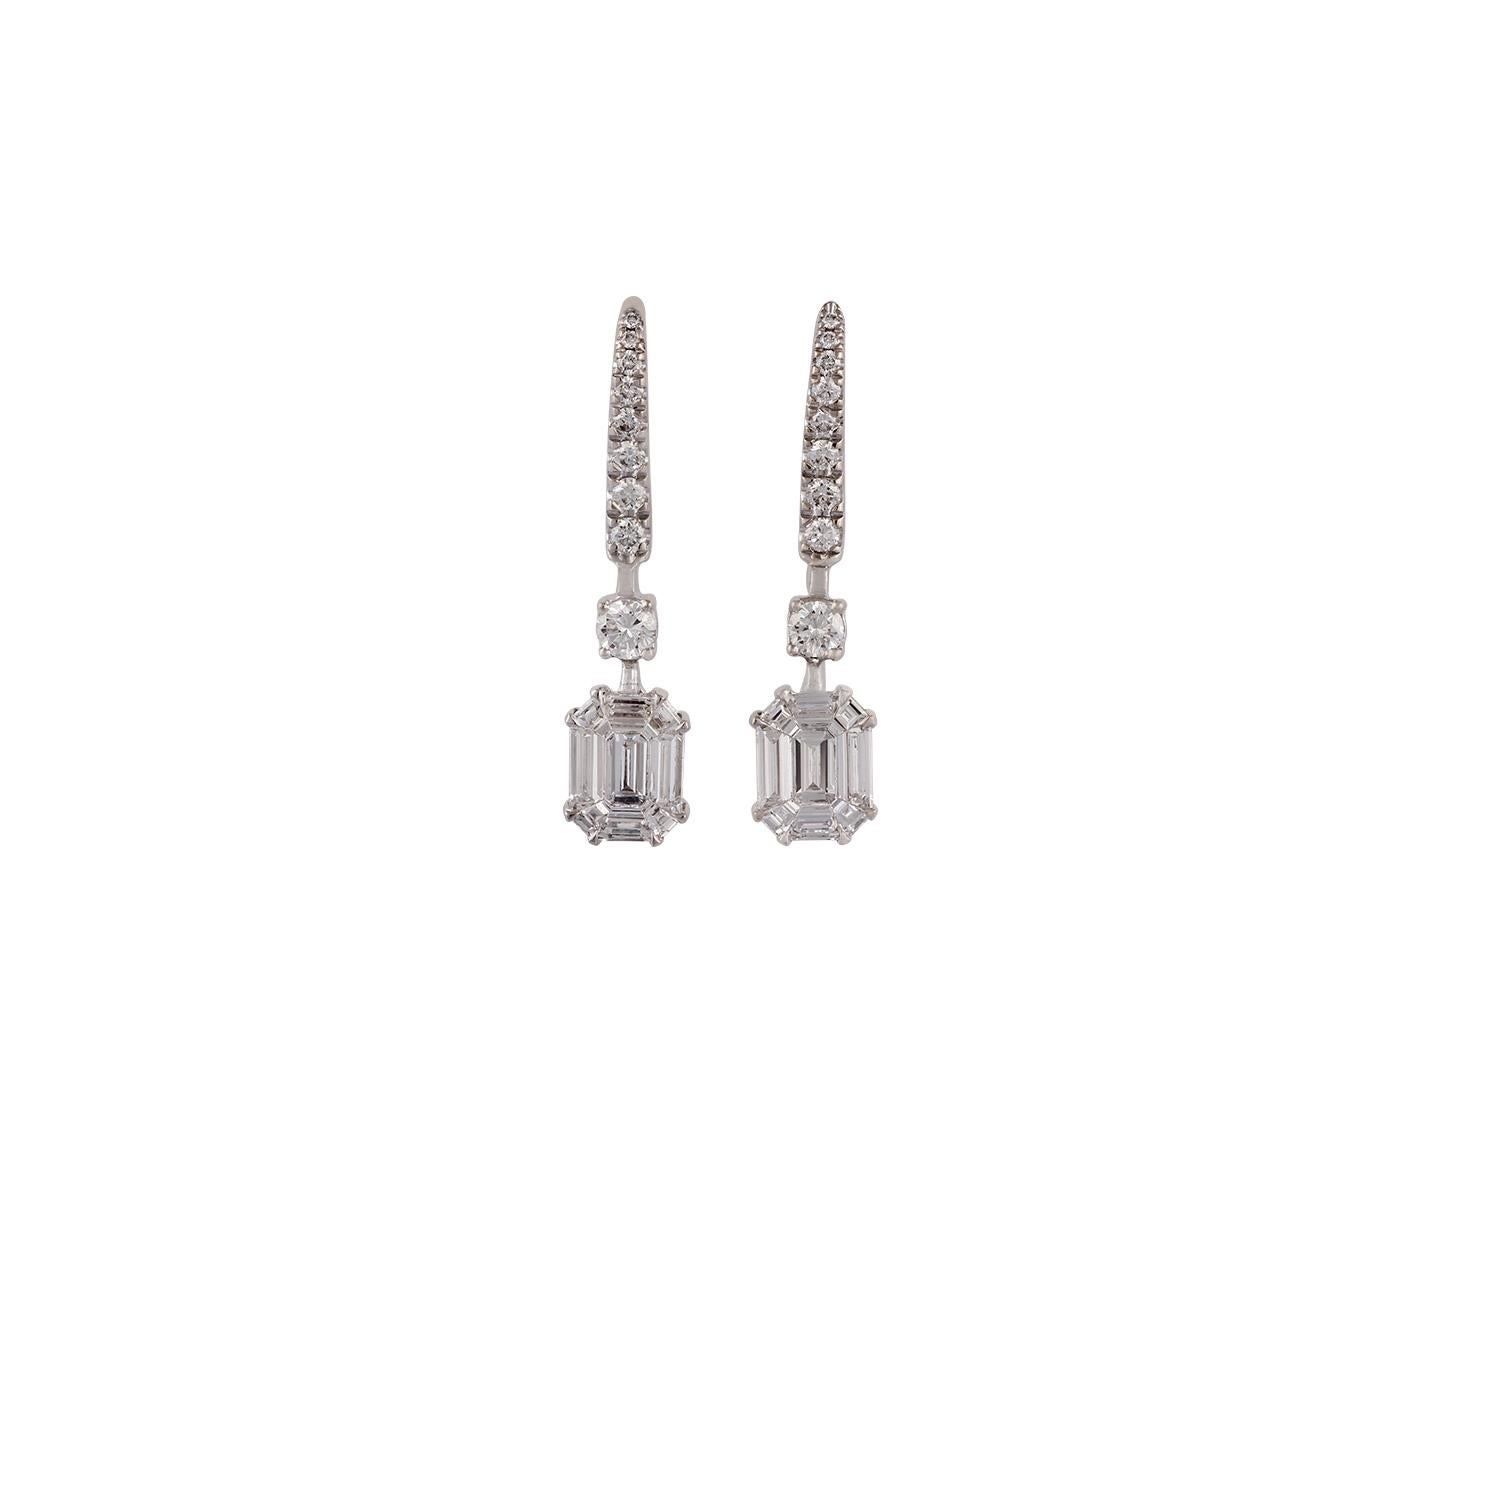 A fantastic pair of dangle earrings features baguette and brilliant-cut round shaped diamonds set in an illusion setting to make it look like a larger emerald cut diamond, in these earrings the combined weight of diamonds is 1.98 carat, earrings are